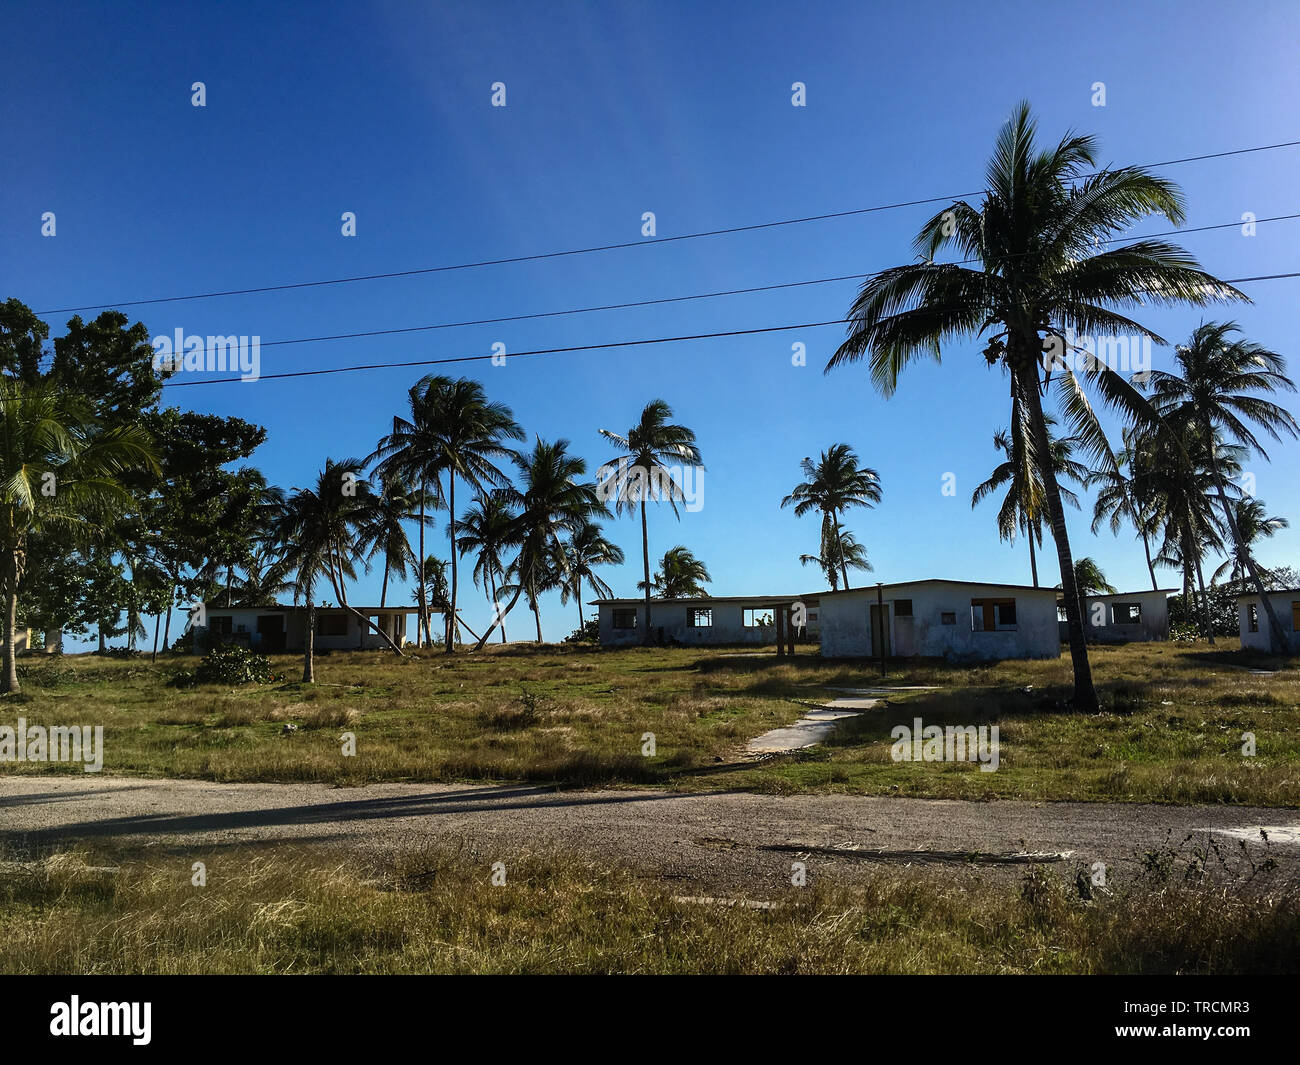 Sunshine over the abandoned vacation houses and palm trees near Playa Coco in Playa Giron, Cuba Stock Photo